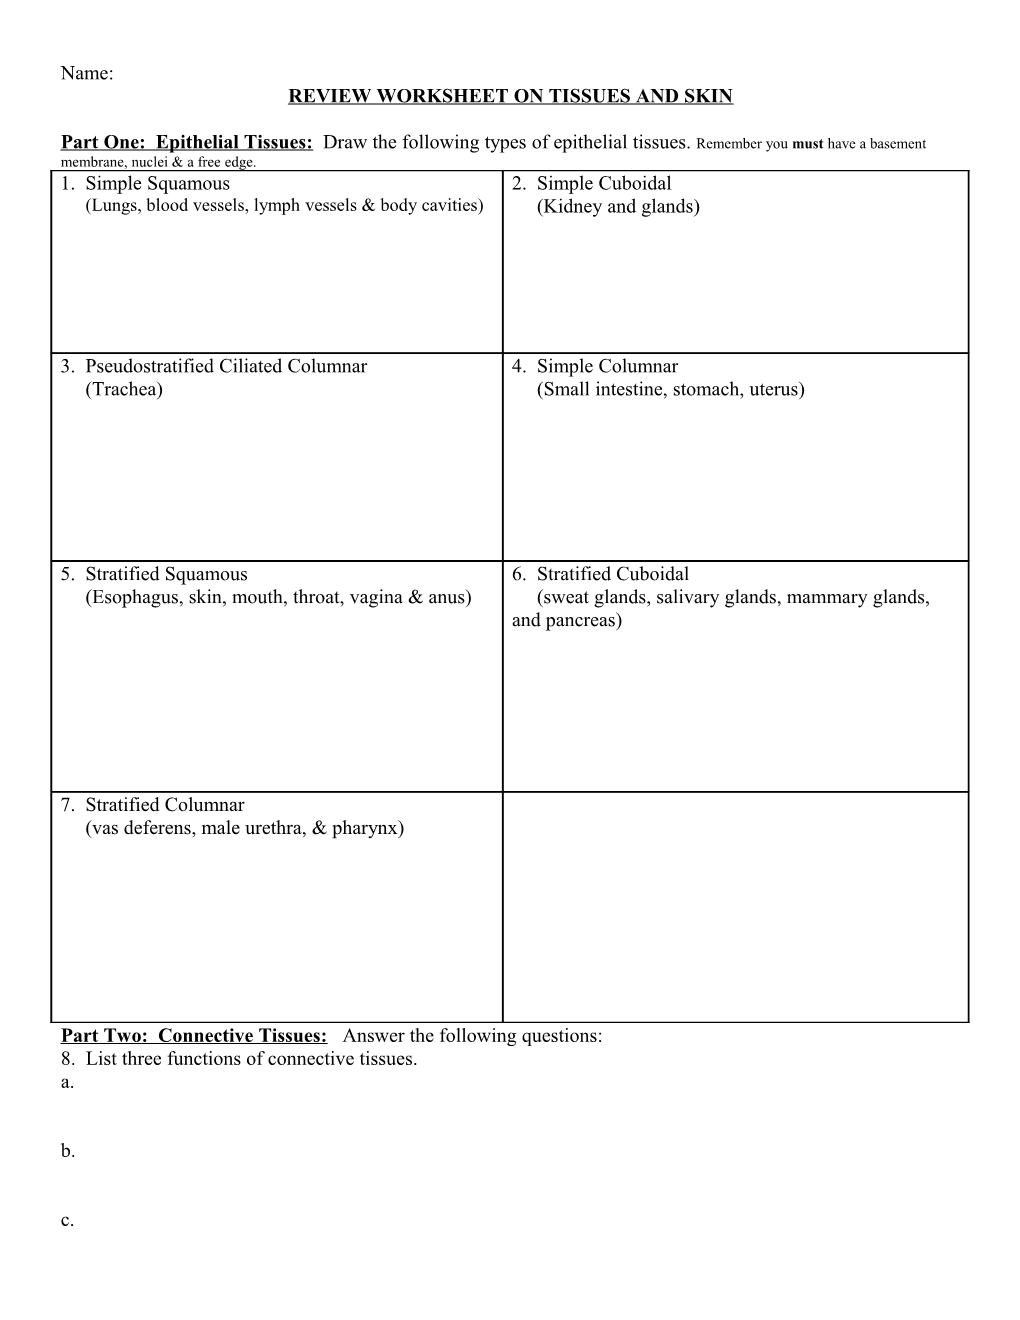 Review Worksheet on Tissues and Skin